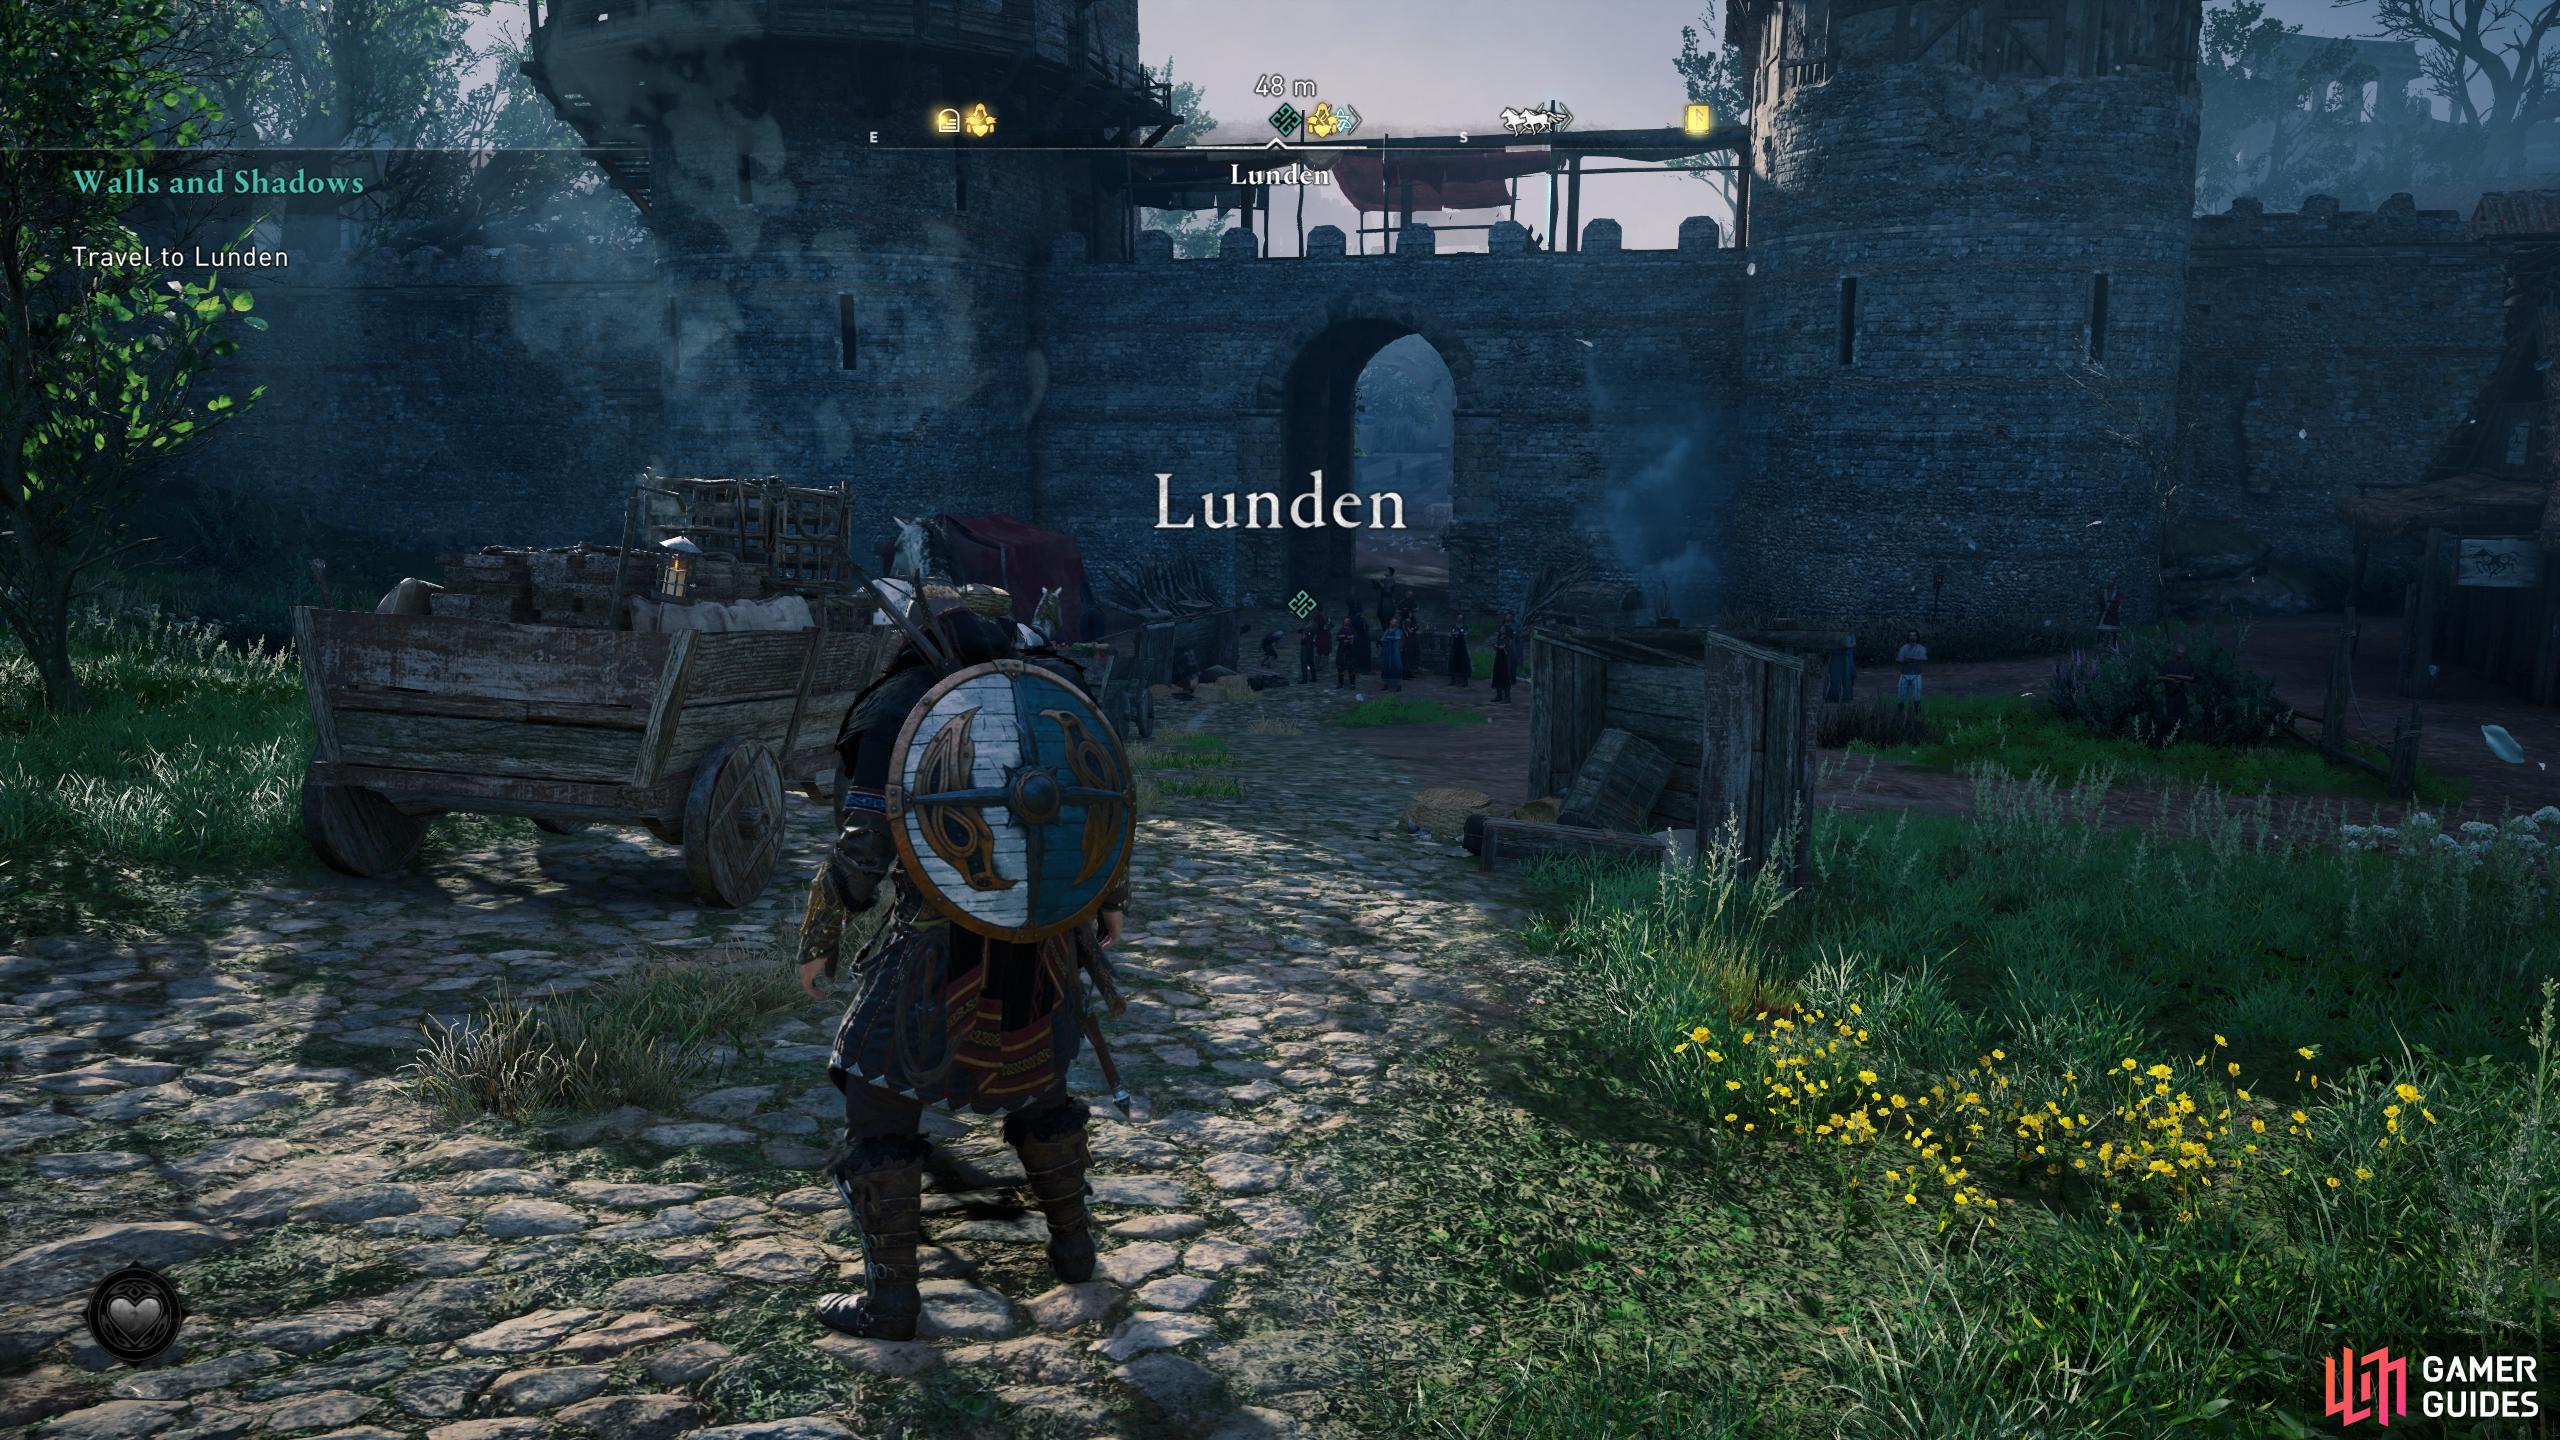 Approach Lunden from the north to begin the quest arc.